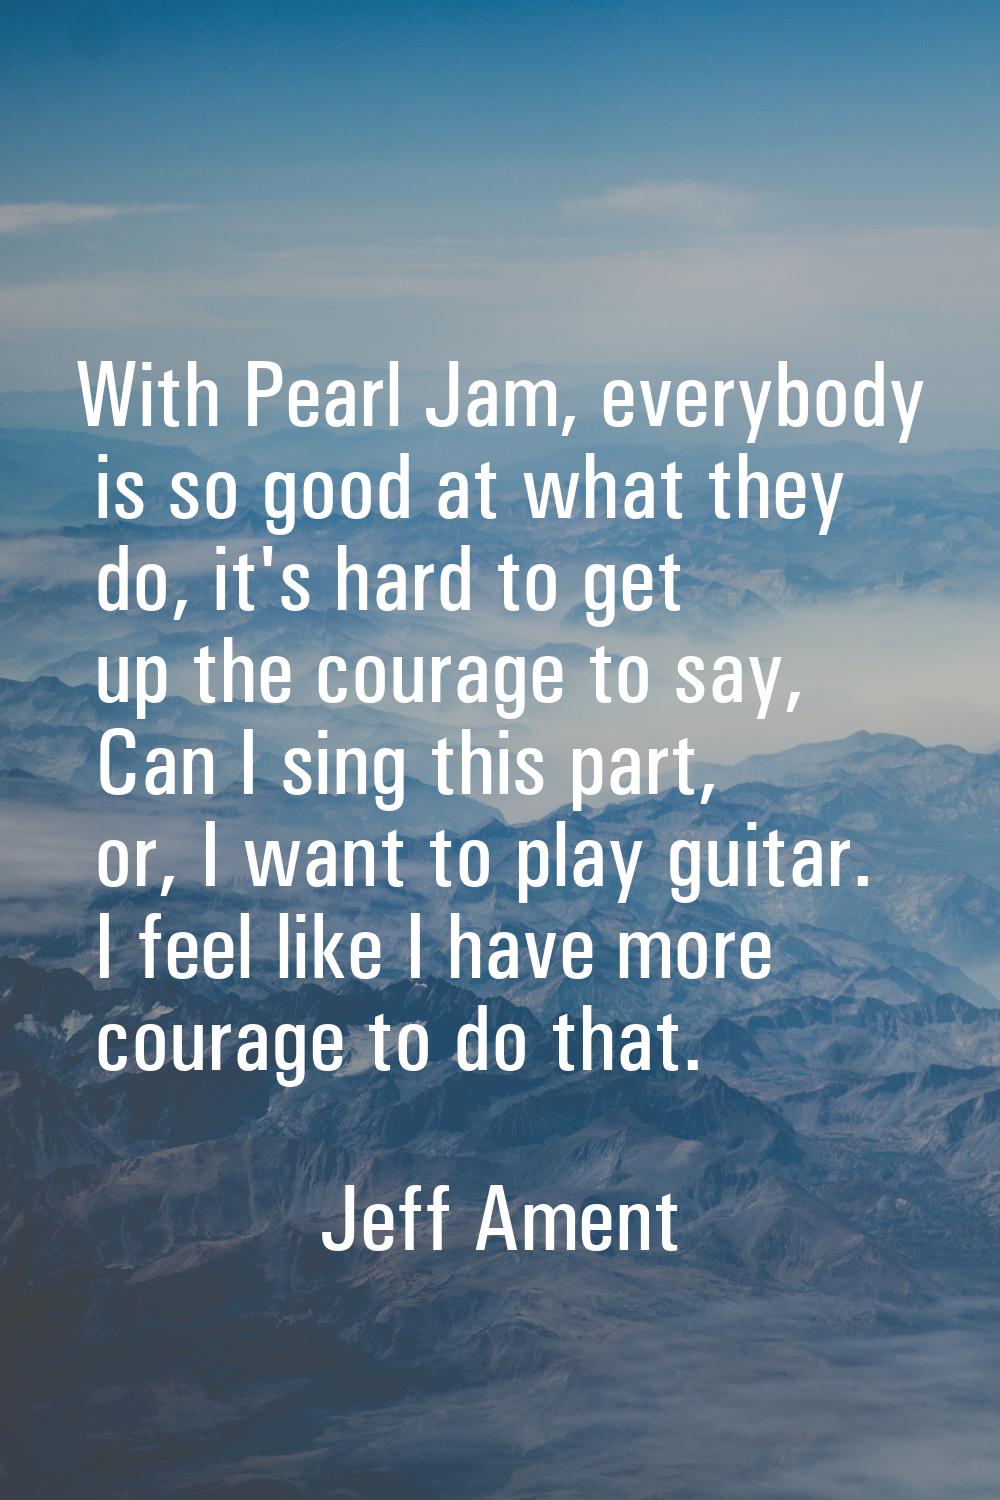 With Pearl Jam, everybody is so good at what they do, it's hard to get up the courage to say, Can I